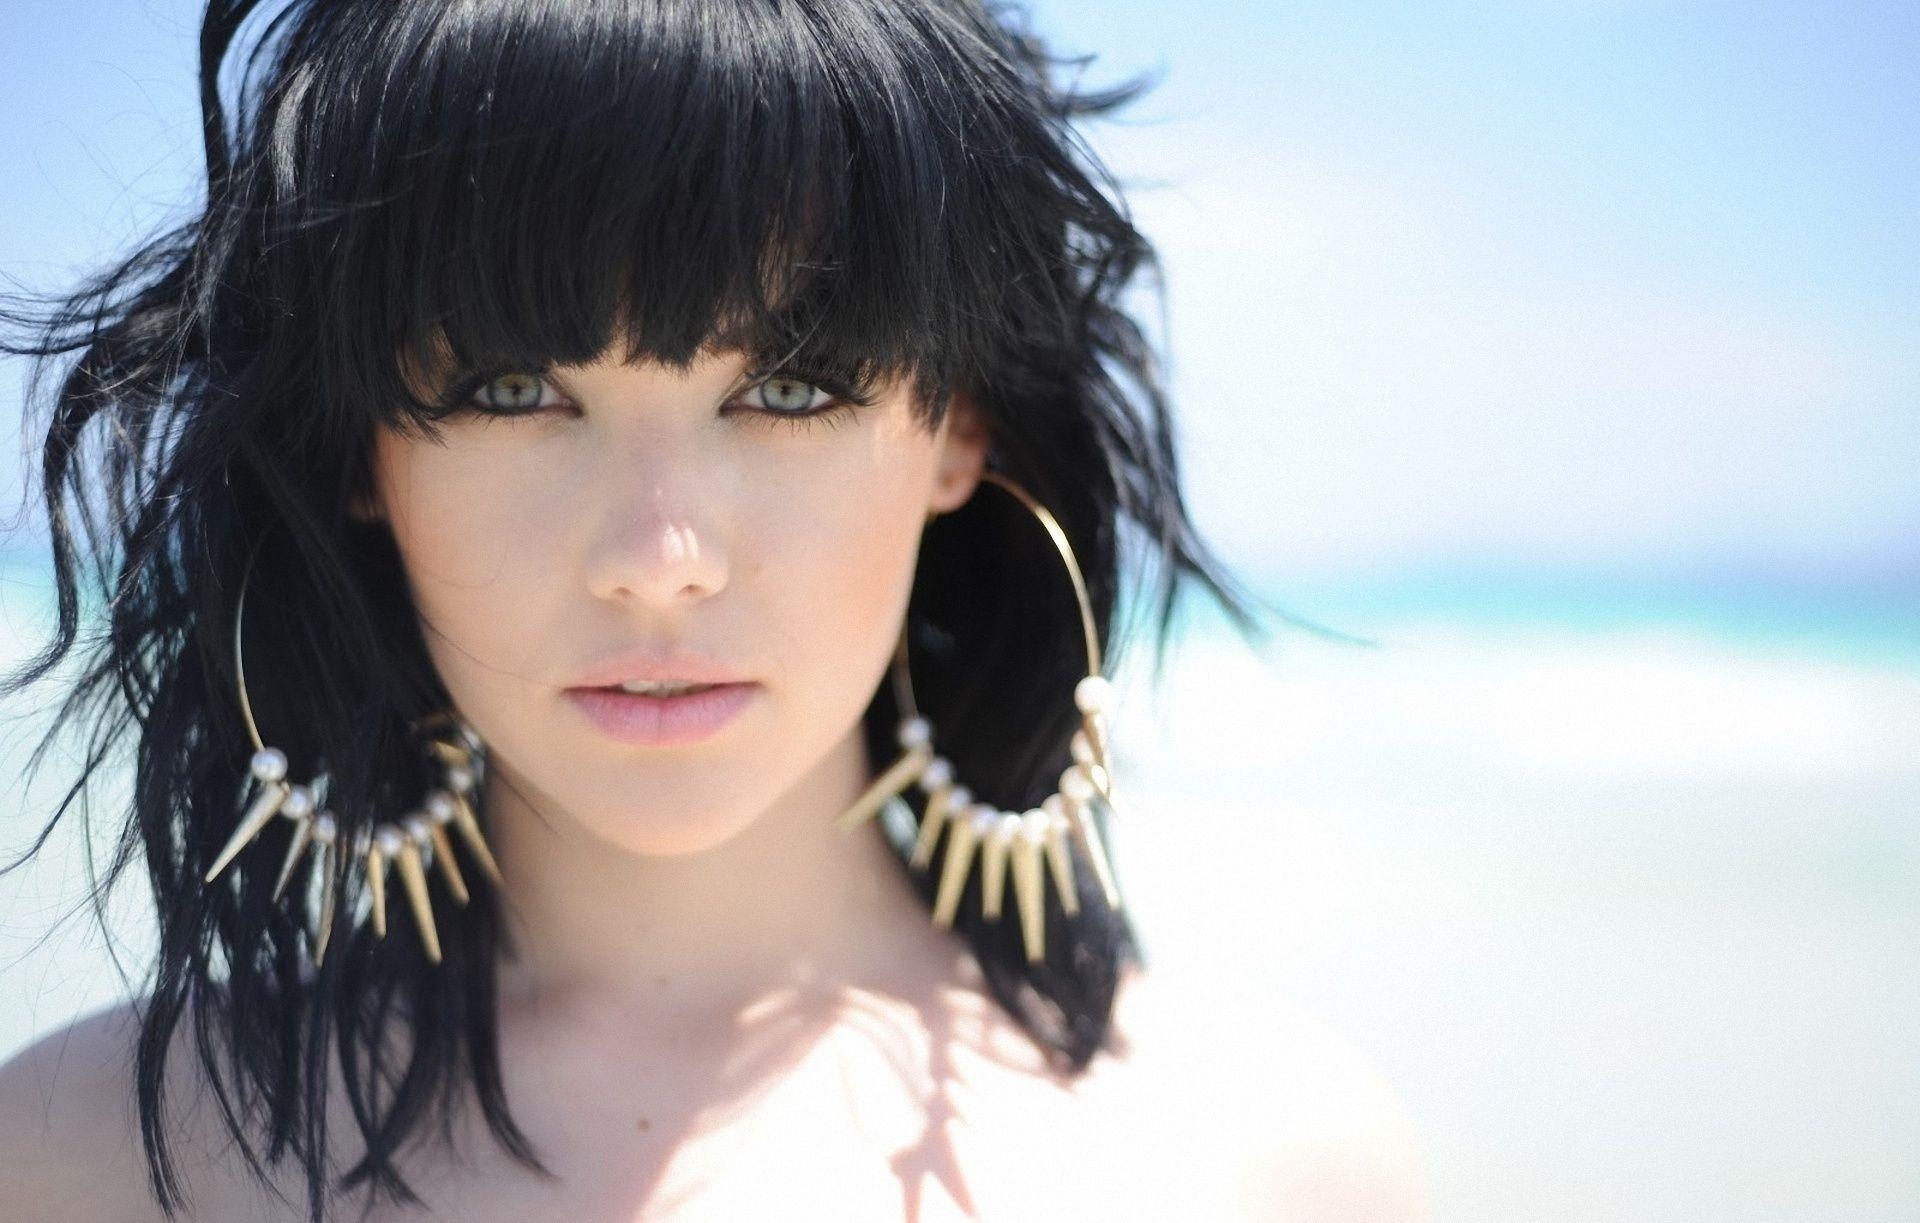 Carly Rae Jepsen Emotion Cell Phone Wallpaper posted by Ethan Cunningham 1920x1230